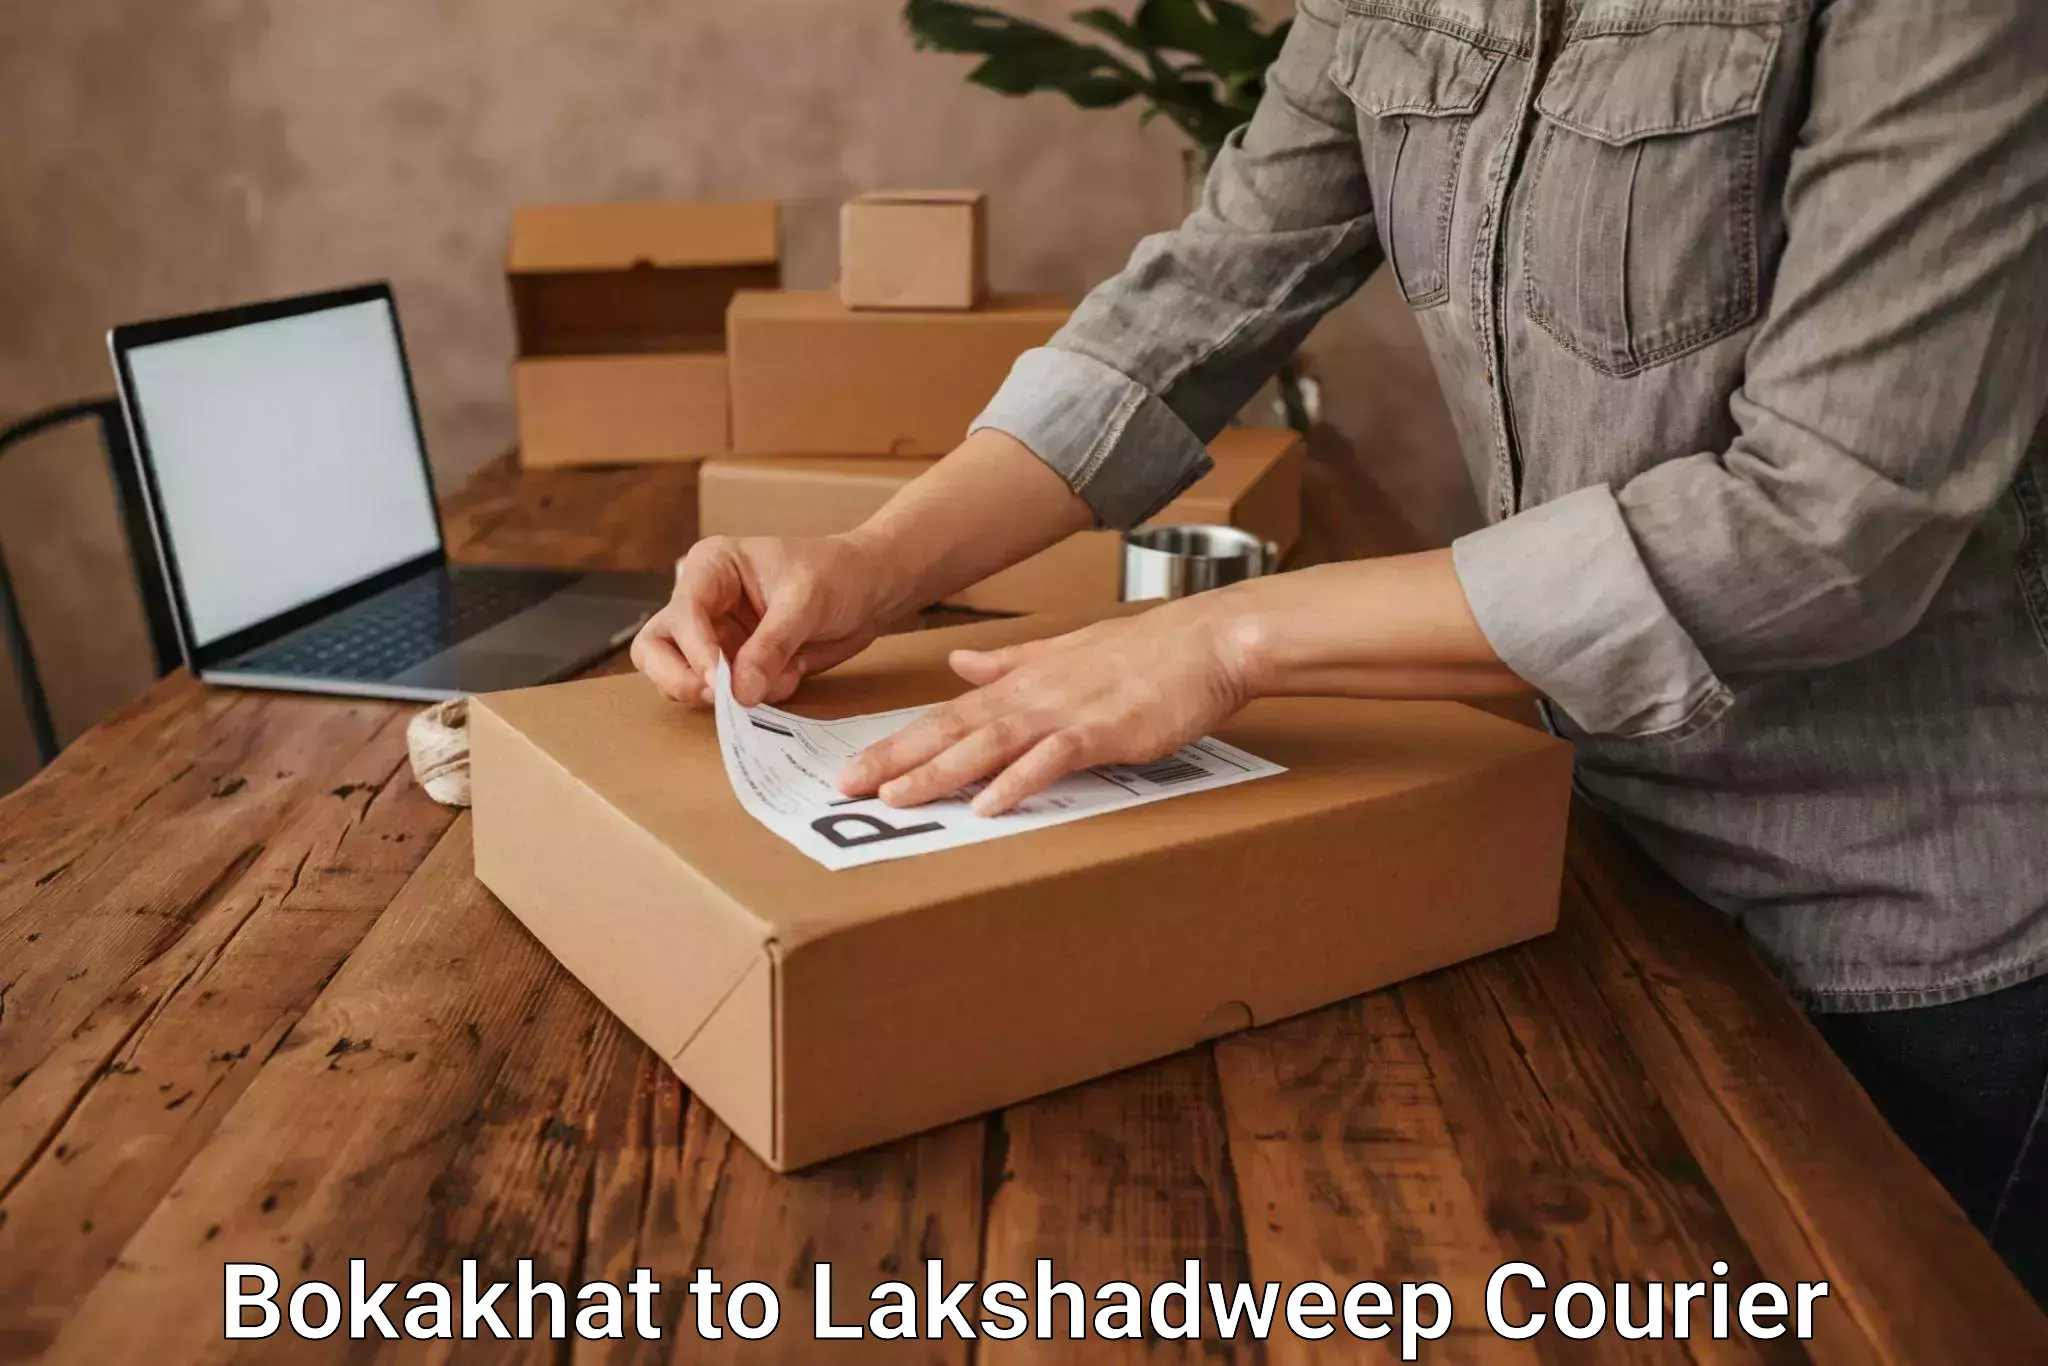 24/7 courier service Bokakhat to Lakshadweep